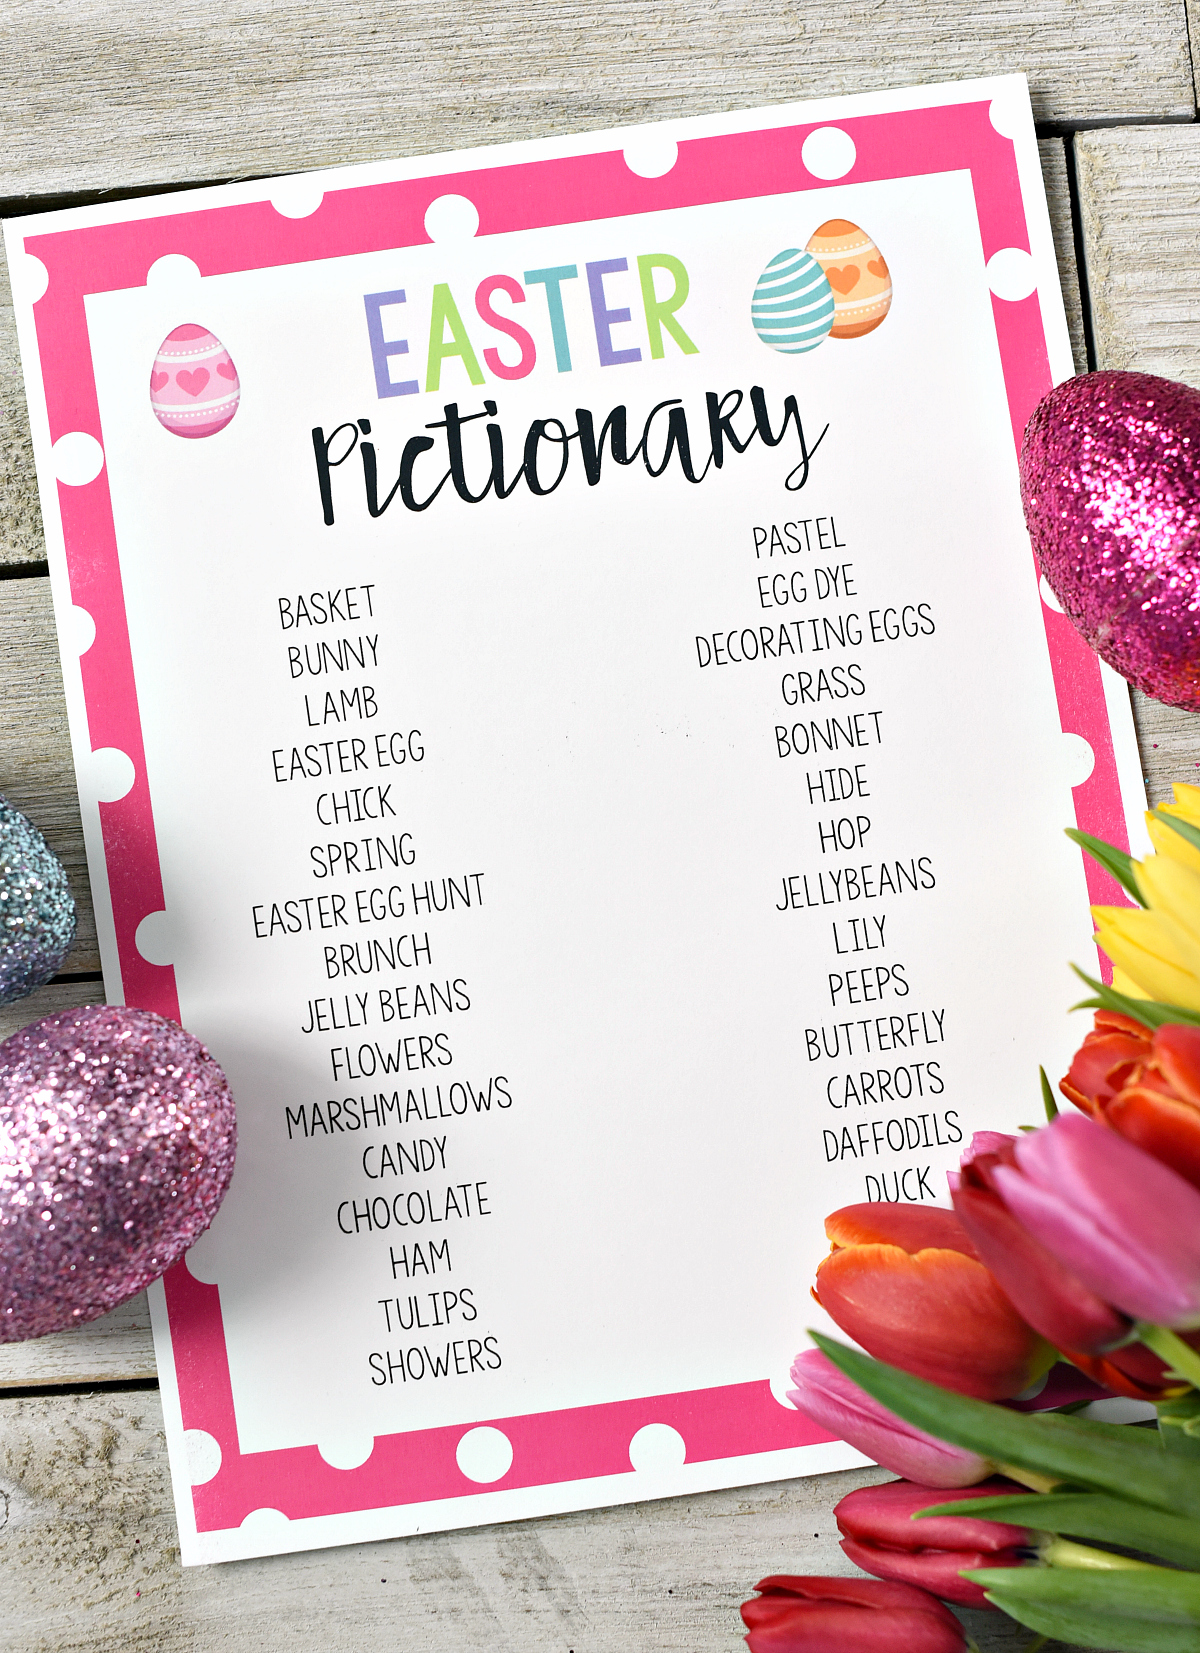 Printable Easter Pictionary Game